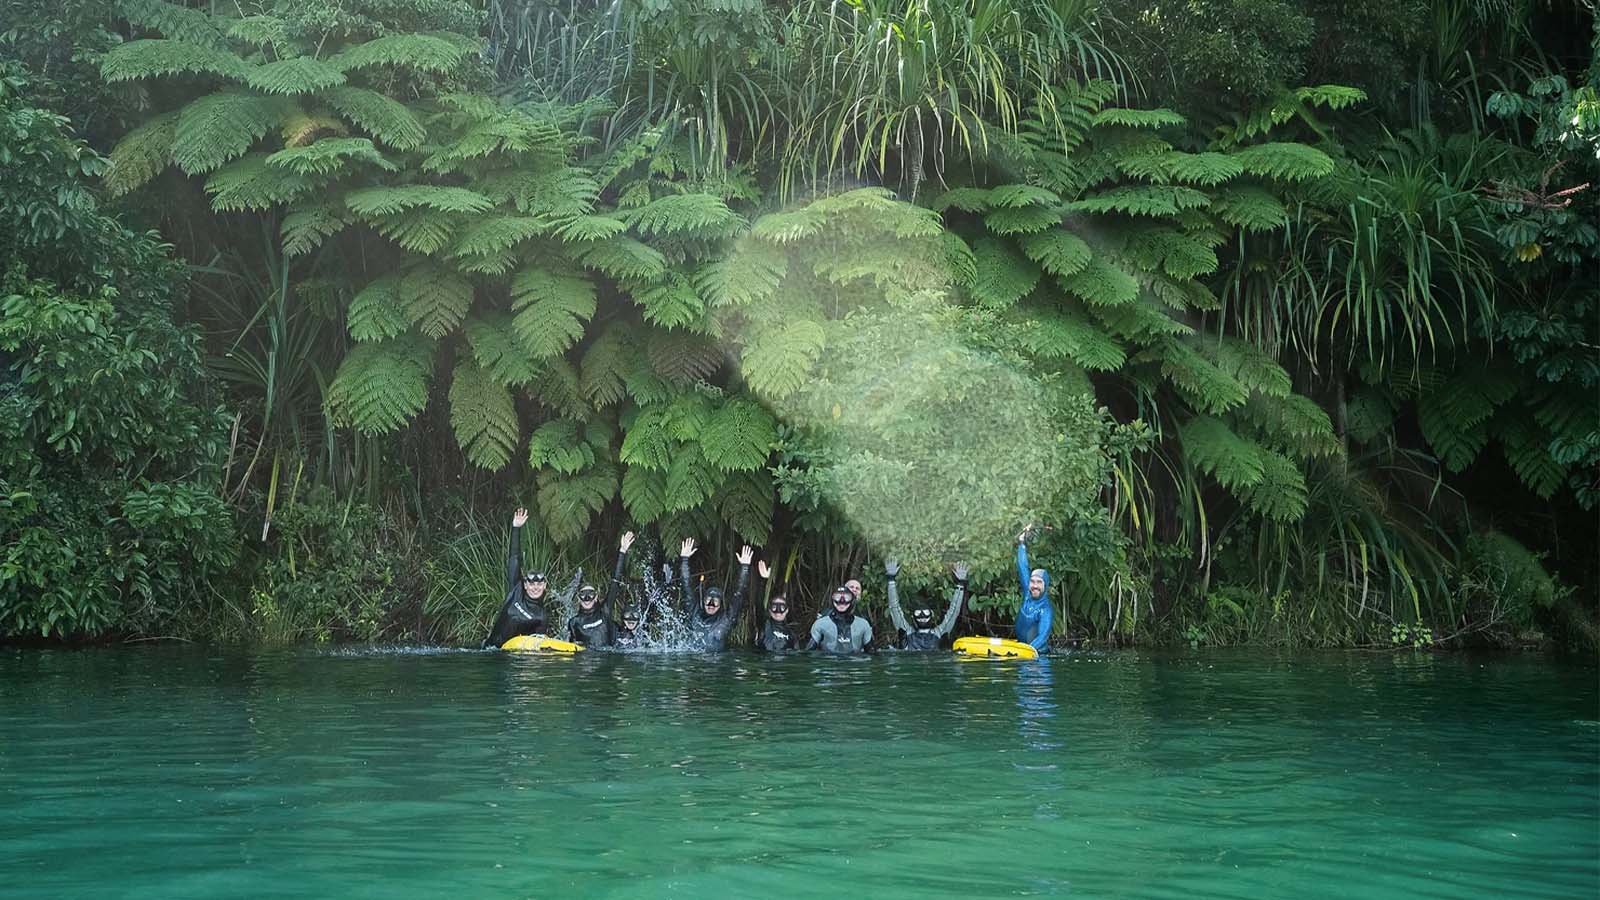 A group of people are in a tropical lake with their arms in the air, smiling and celebrating